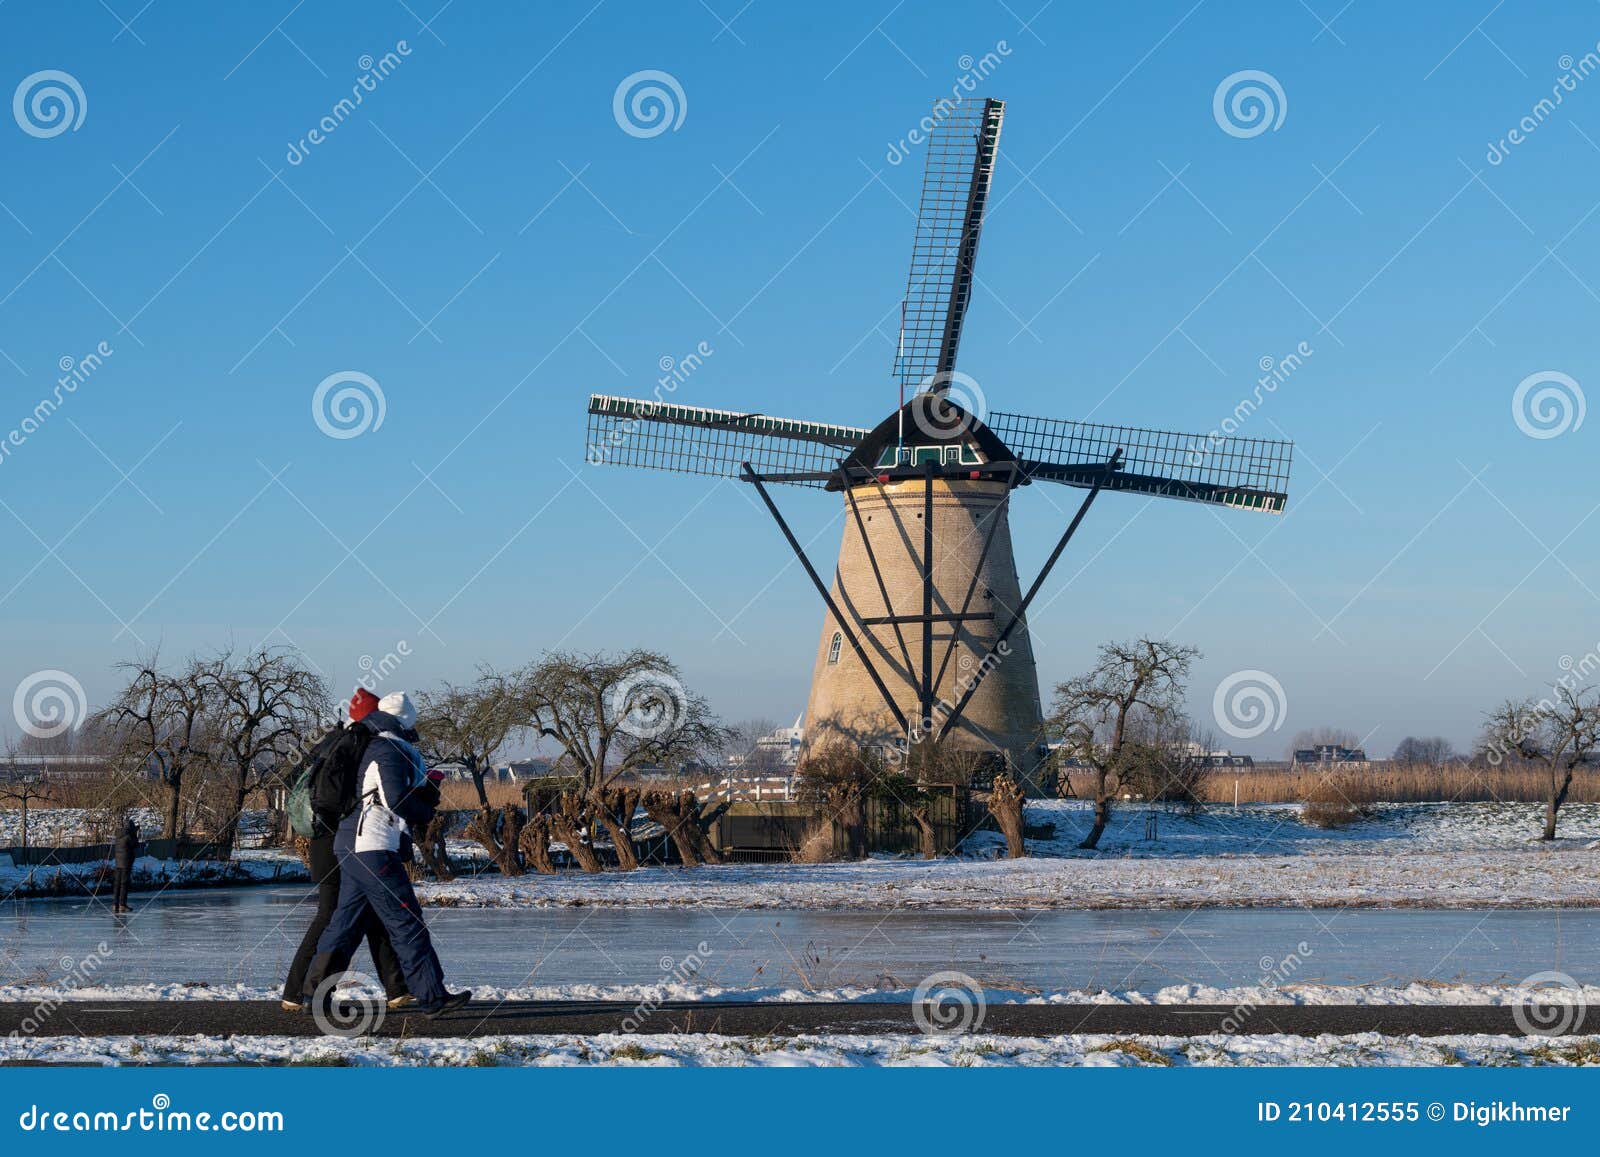 two locals on a frozen windmill canal pathway at sunrise moment